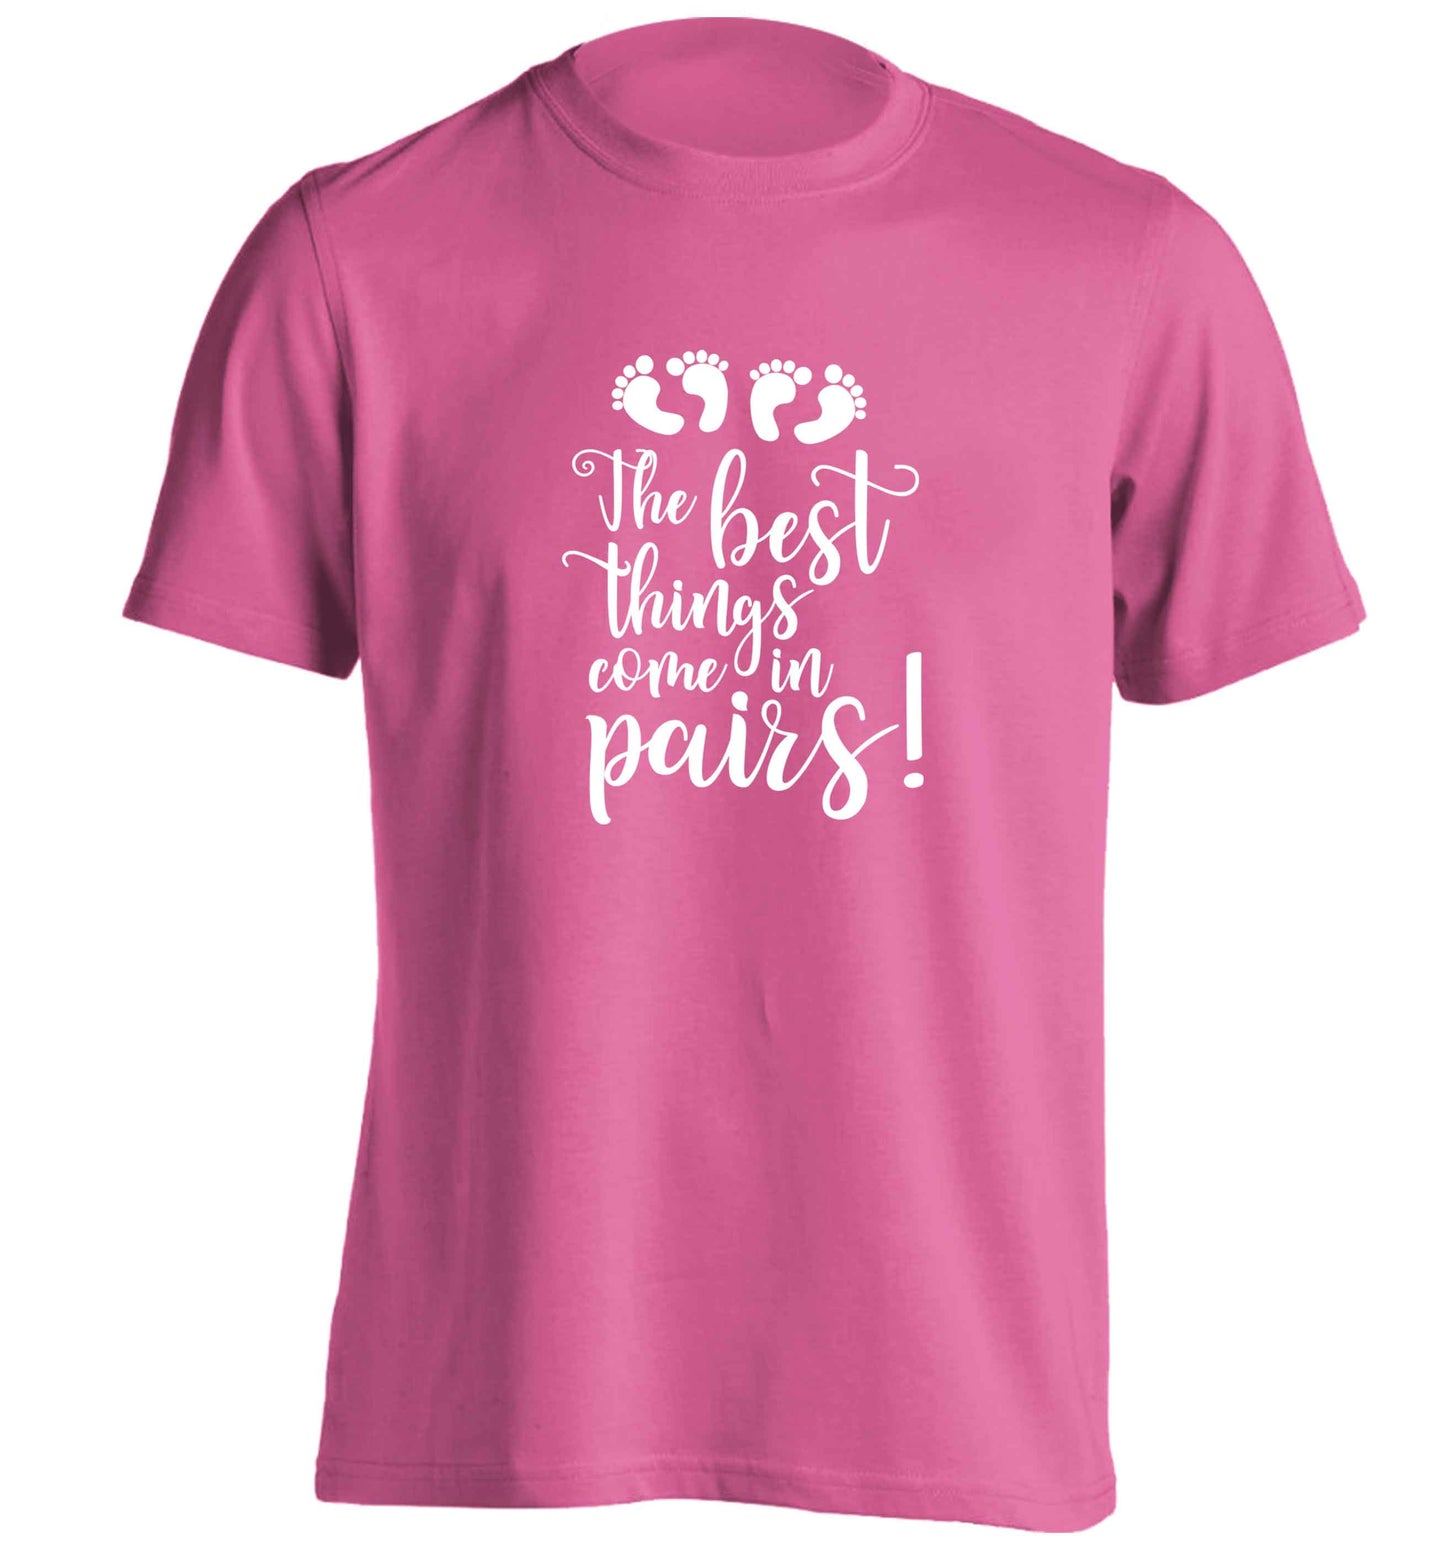 The best things come in pairs! adults unisex pink Tshirt 2XL